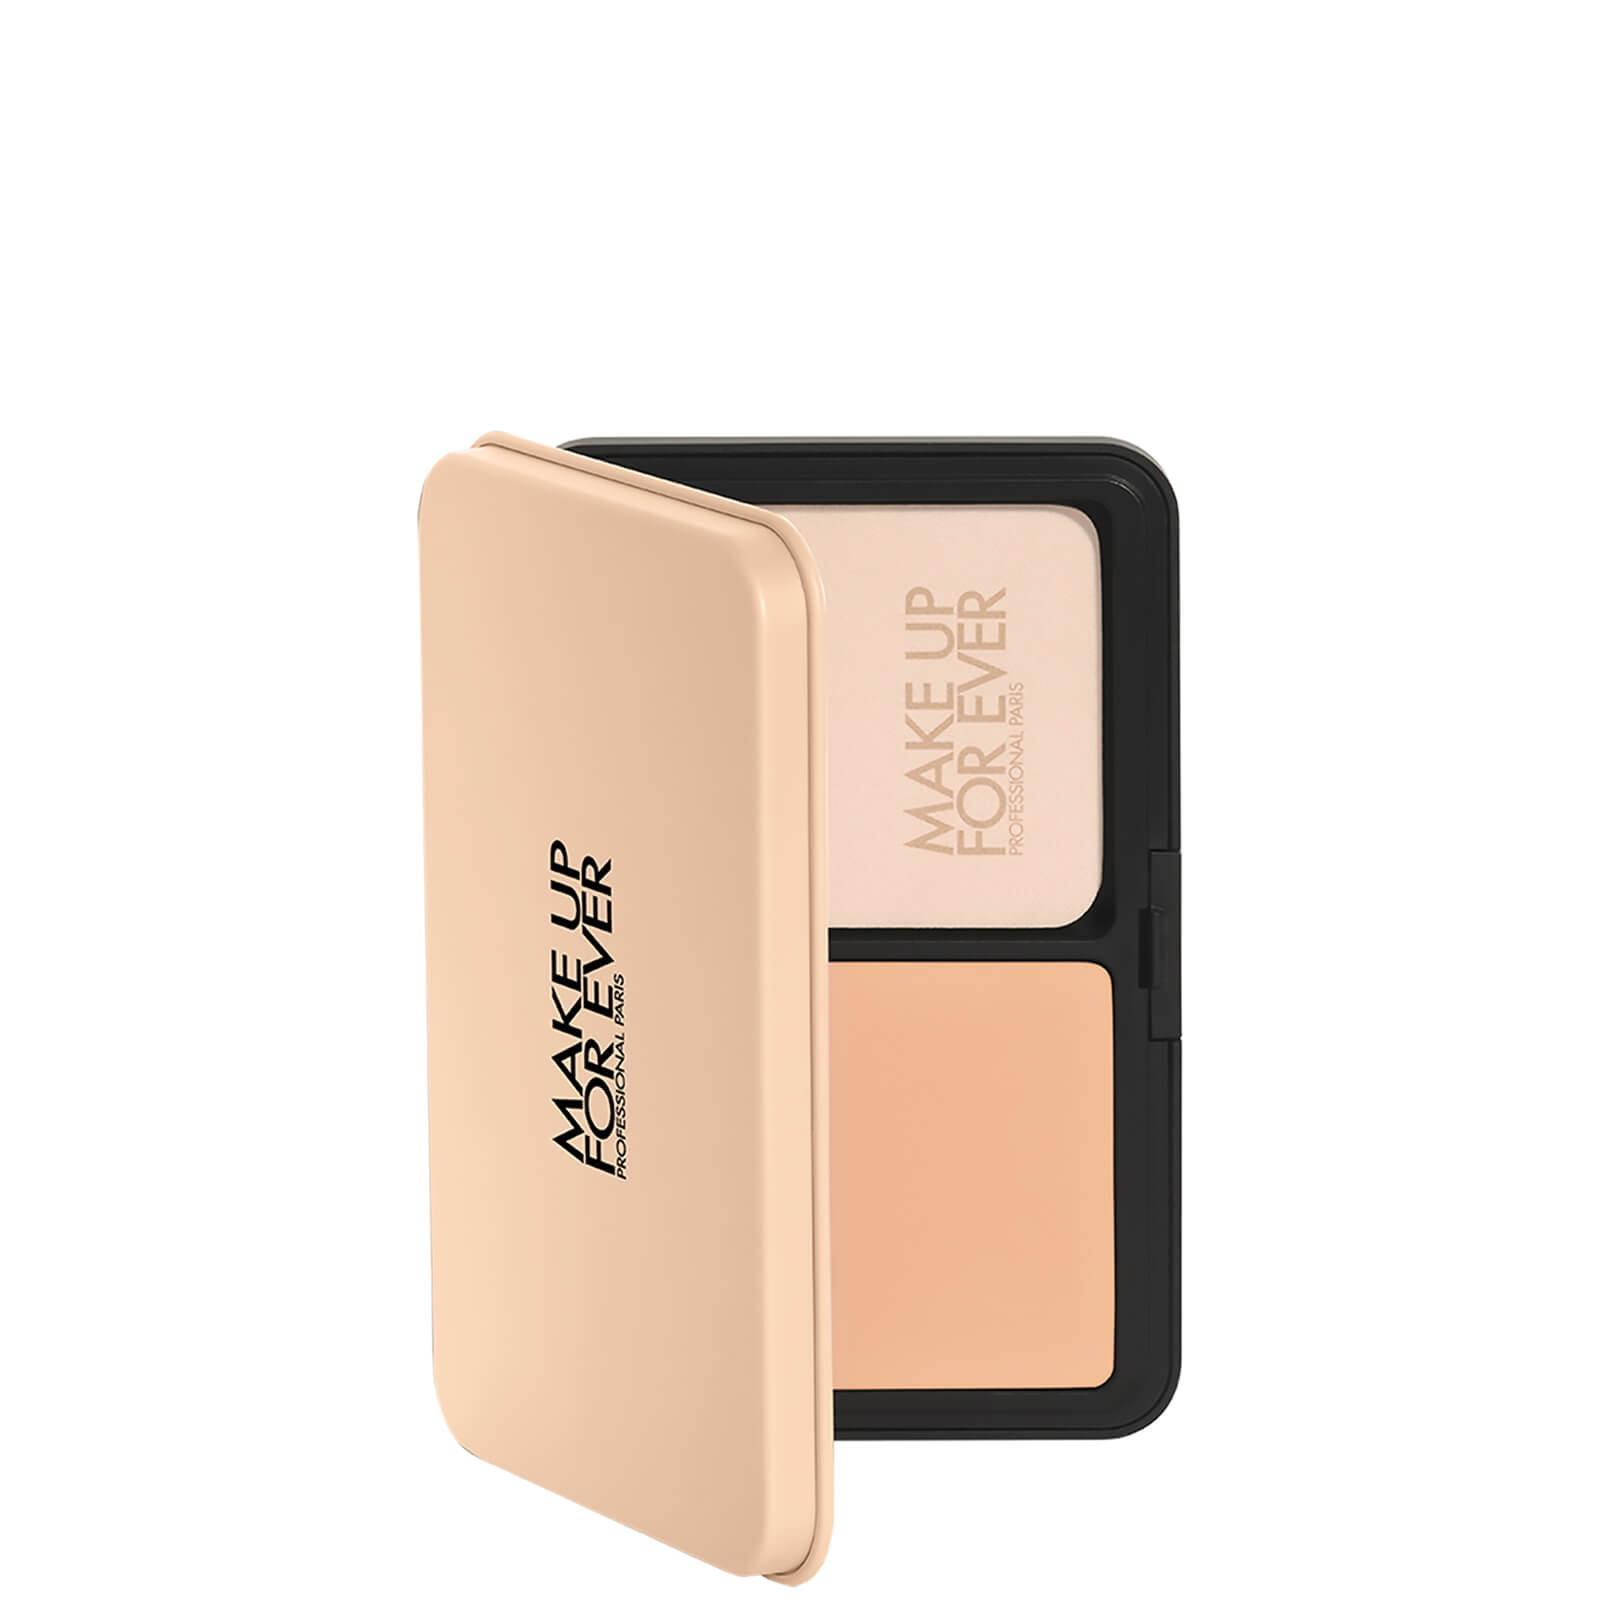 MAKE UP FOR EVER HD SKIN Powder Foundation 11g (Various Shades) - 1Y18